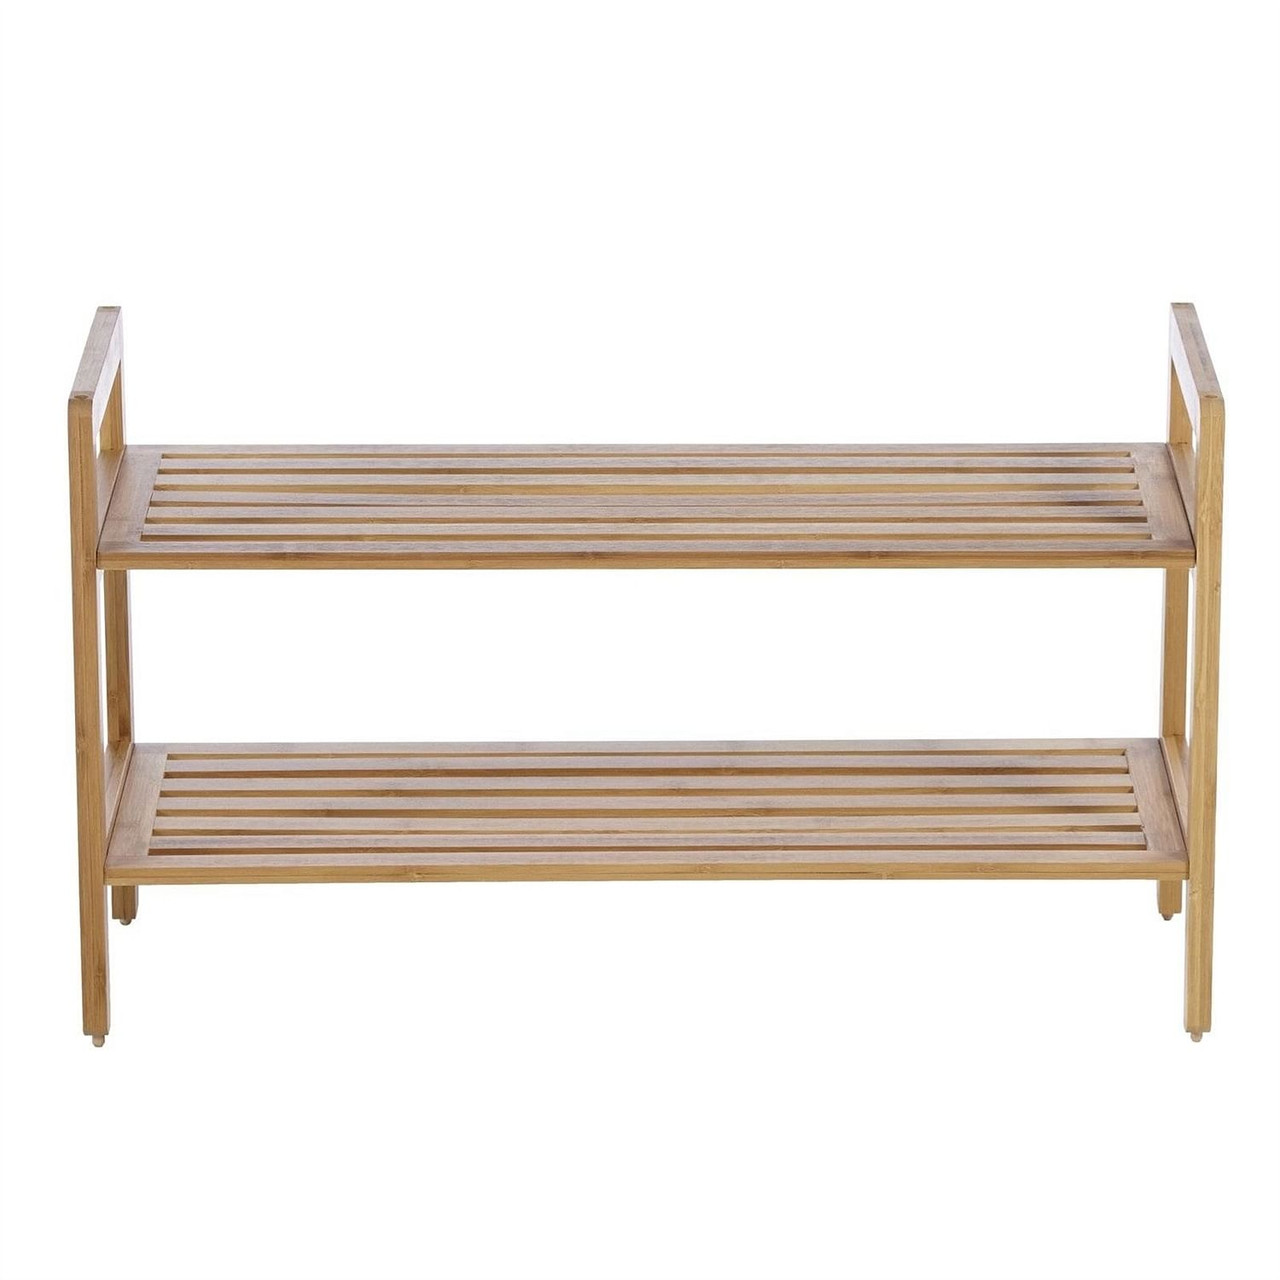 Modern Bamboo 2-Shelf Shoe Rack - Holds up to 8-Pair of Shoes